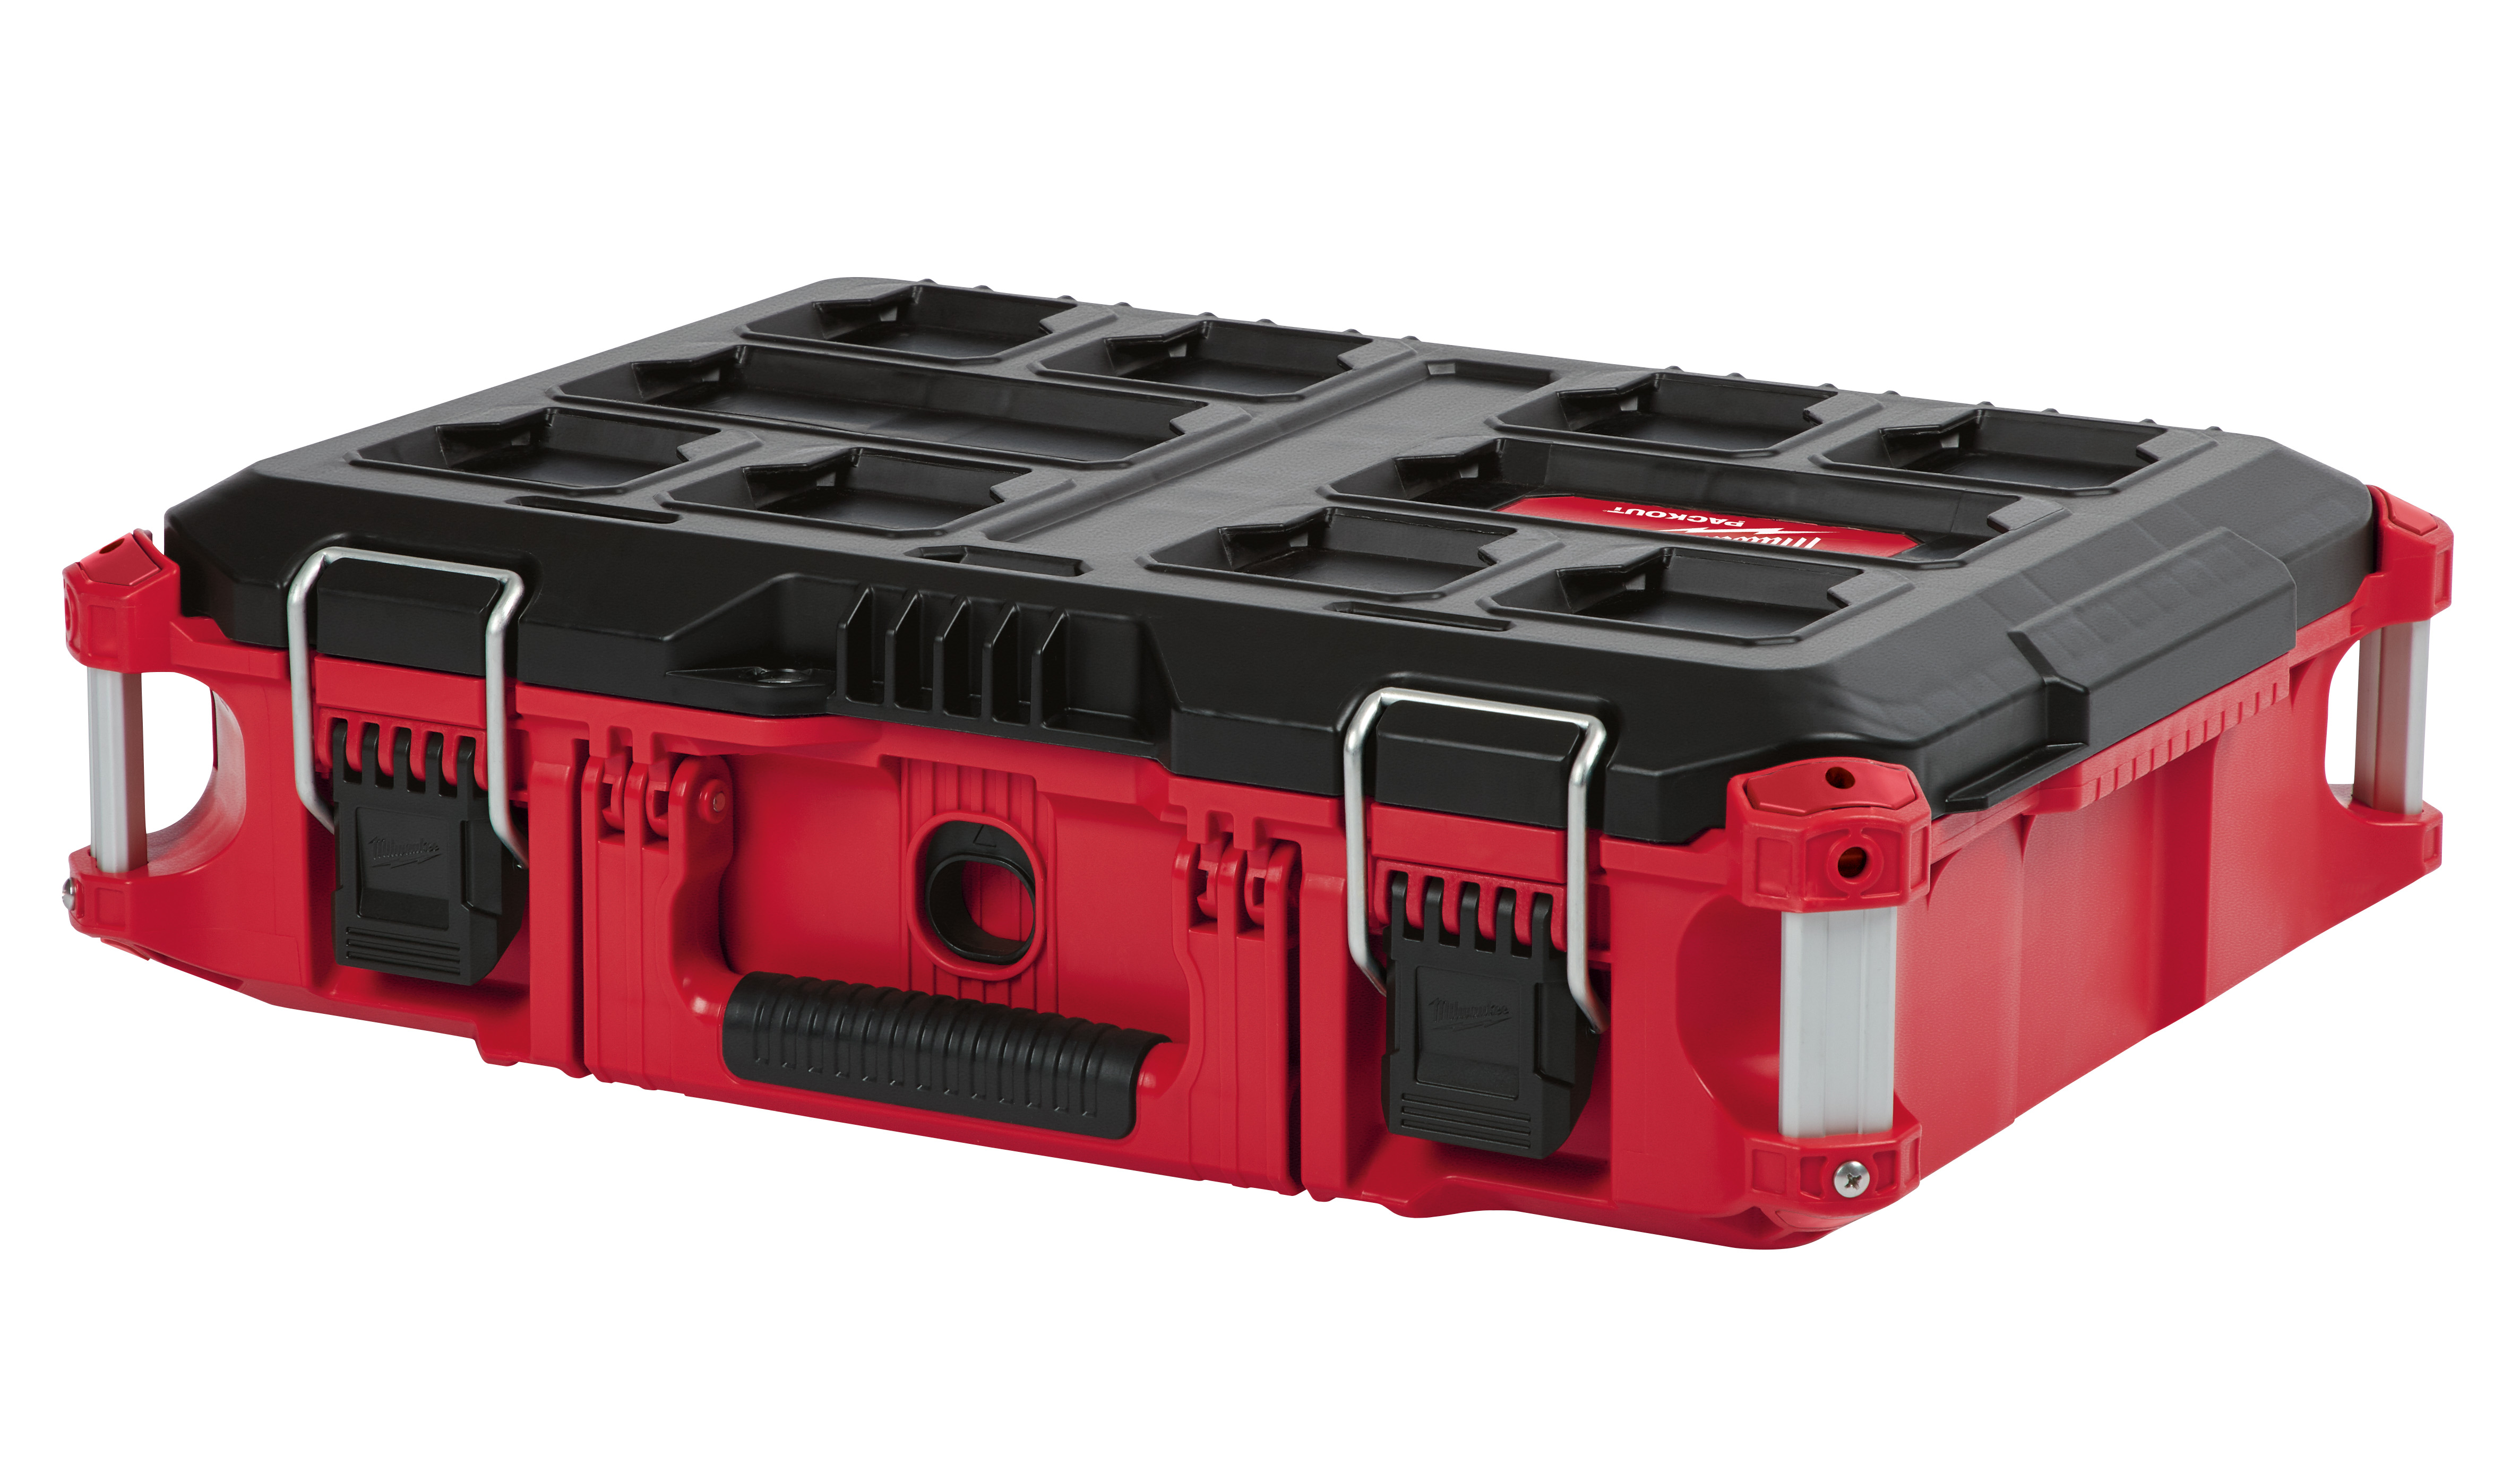 Part of the industry’s most versatile and most durable modular storage system, the Milwaukee PACKOUT™ tool box is constructed with impact resistant polymers and metal reinforced corners to provide up to 75 lbs of weight capacity and ultimate durability in harsh jobsite conditions. Featuring an IP65 rated weather seal to keep out rain and jobsite debris, and integrated organizers bins, the Milwaukee PACKOUT™ tool box is the fully compatible with all Milwaukee PACKOUT™ modular storage products.